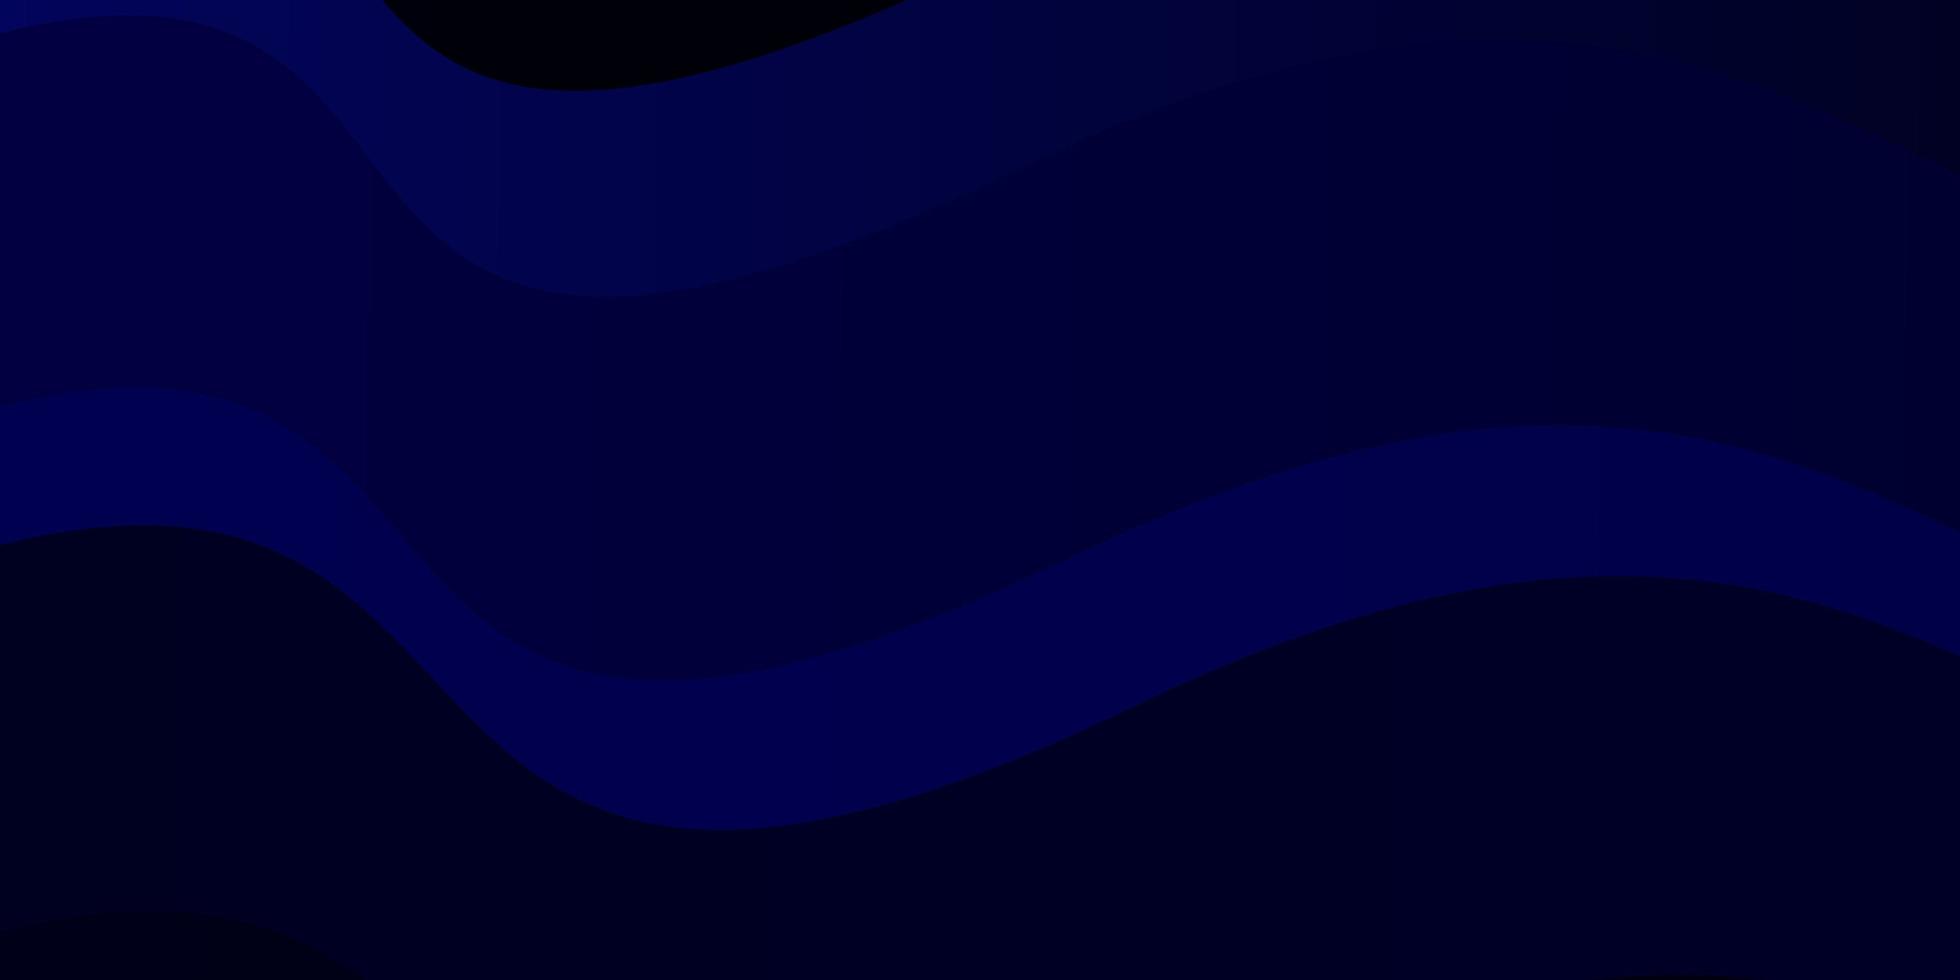 Dark BLUE vector background with bent lines. Abstract illustration with bandy gradient lines. Pattern for websites, landing pages.